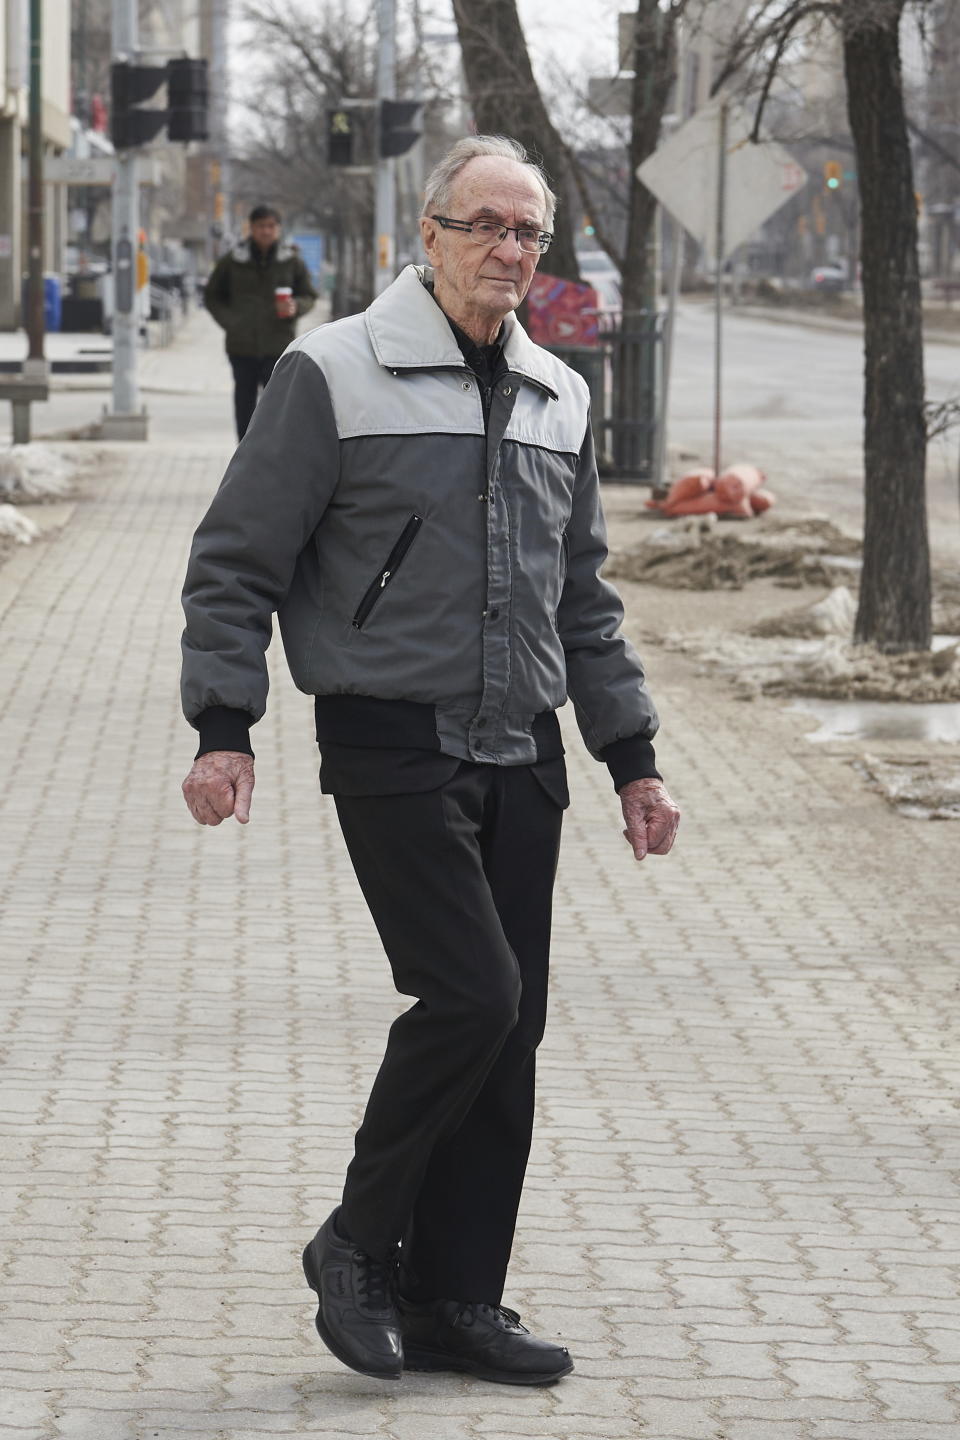 Retired priest Arthur Masse, 93, leaves the Law Courts in Winnipeg, Thursday, March 30, 2023 after a judge acquitted him of forcing himself on a residential school student more than 50 years ago, saying she believes an assault happened but could not determine beyond a reasonable doubt who did it. (David Lipnowski /The Canadian Press via AP)